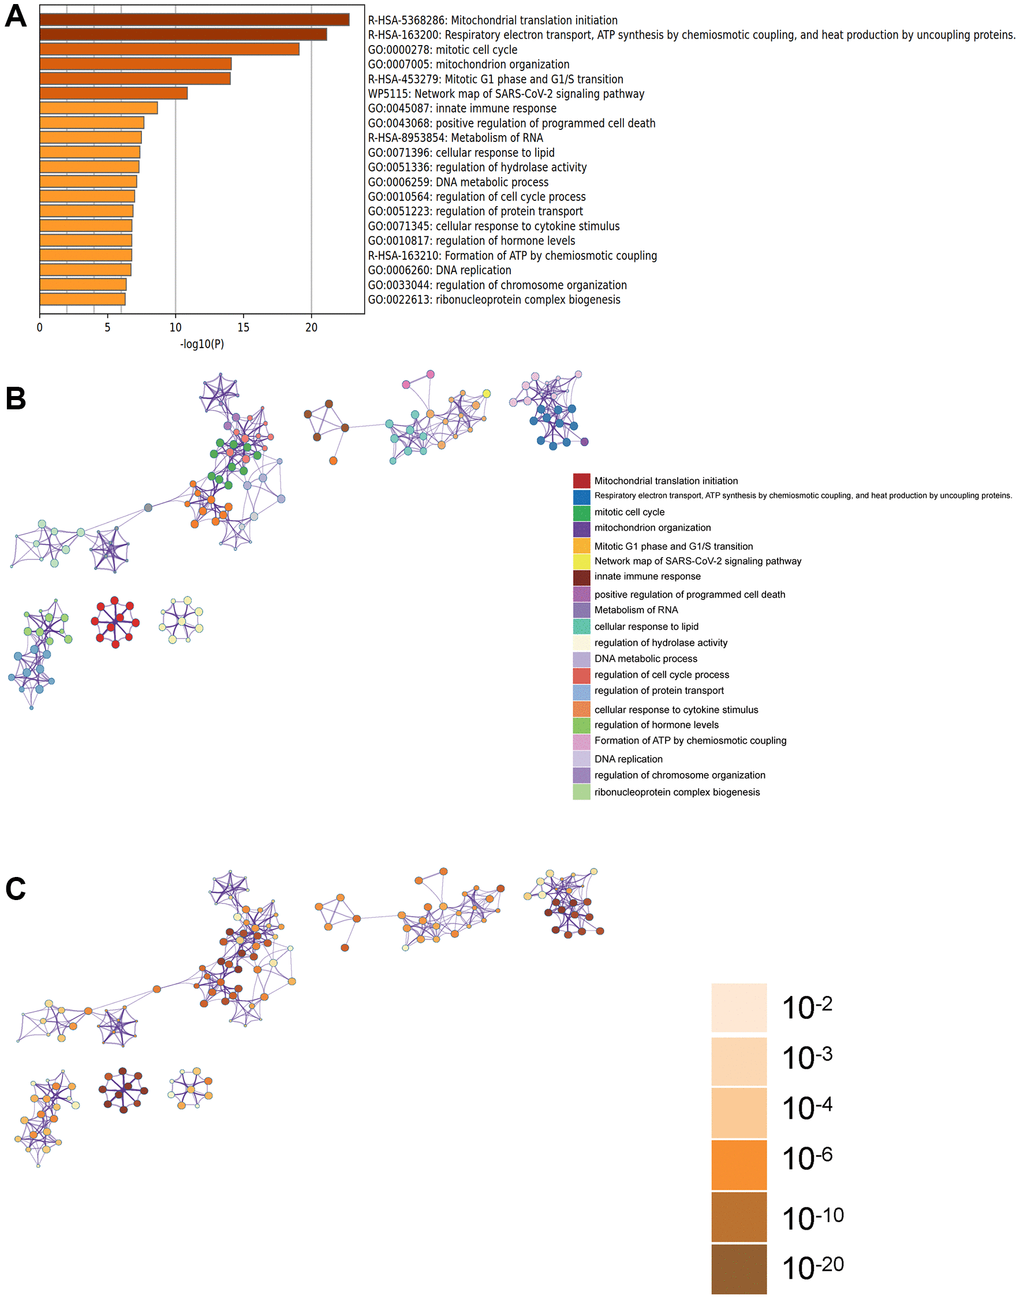 Metascape enrichment analysis. (A) Enrichment items in GO include mitochondrial organization, innate immune response, DNA metabolic process. (B, C) Enrichment networks colored by enrichment items and p-values.